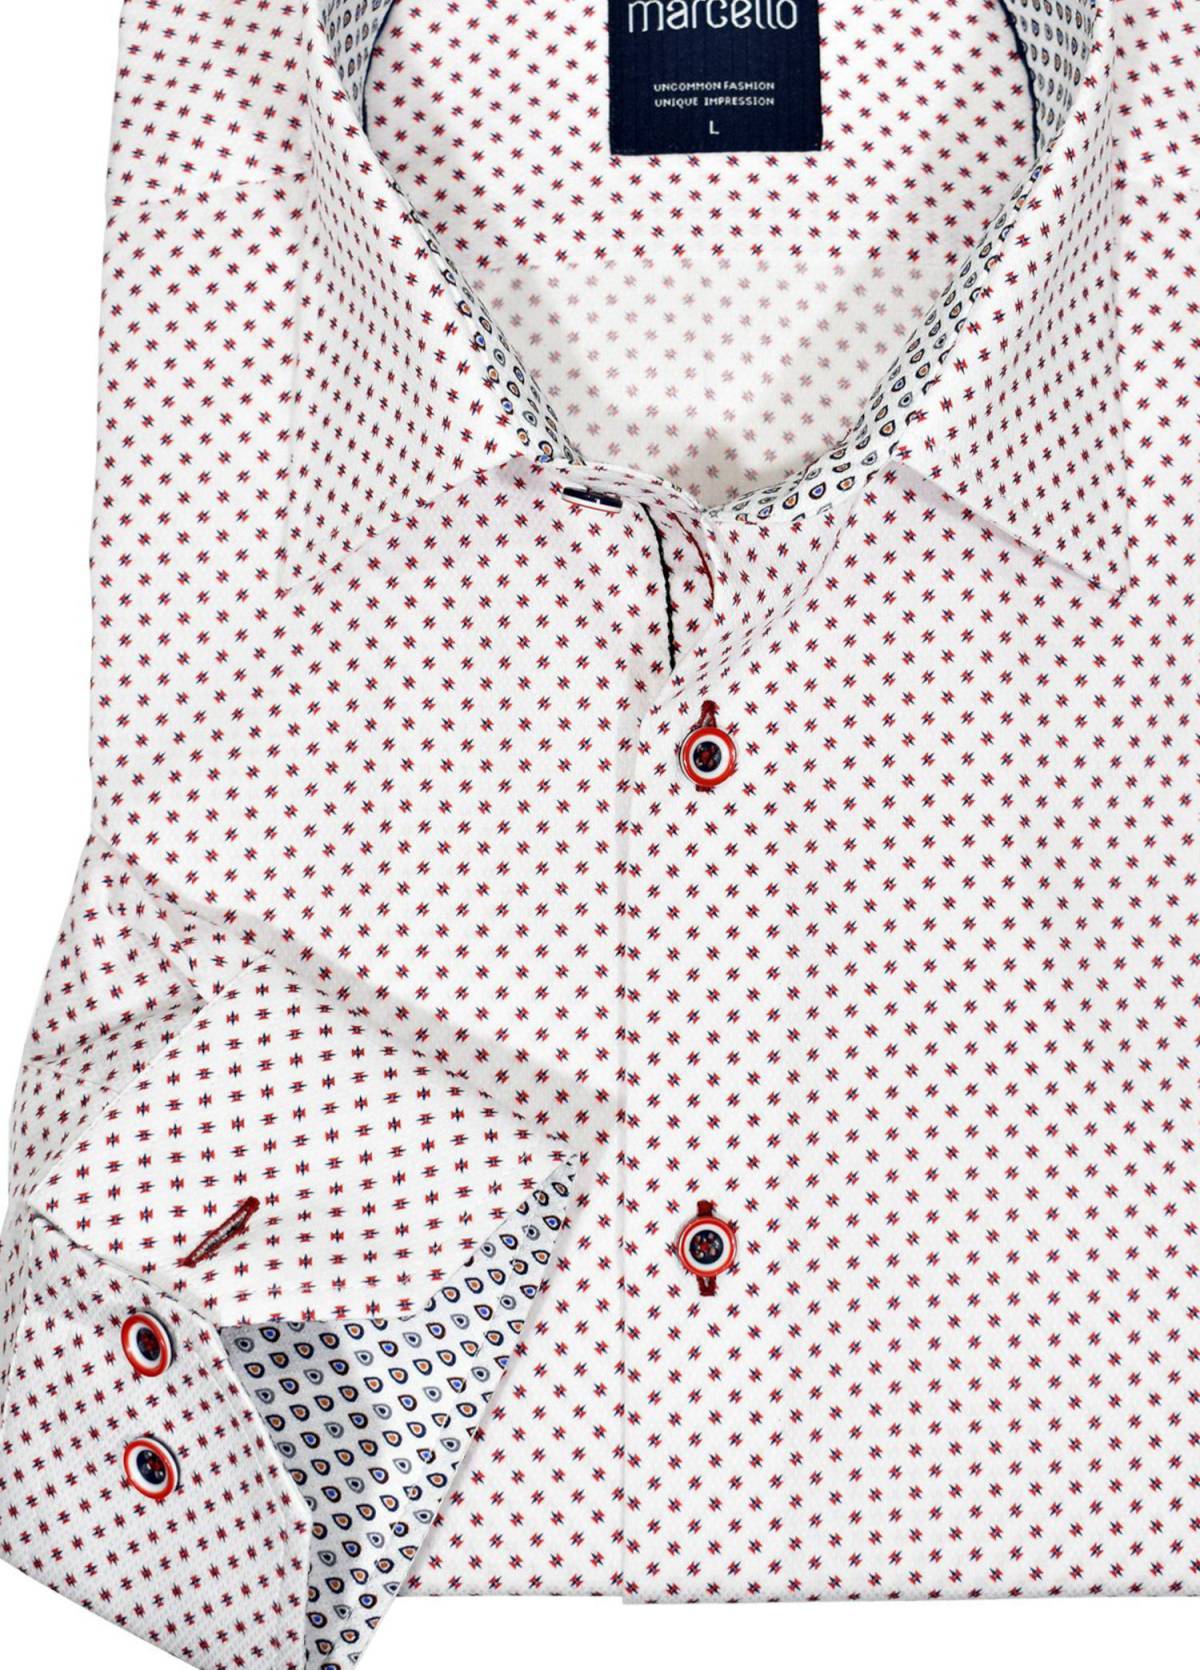 Fine cotton microfiber fabric with an excellent herringbone tonal base pattern for an exquisite look in a traditional pattern.  White base color with a red and dark navy neat pattern.  Soft cotton microfiber fabric for performs well and feels great.  Hand selected buttons with contrast stitch detailing.  Second cuff placket button for the perfect cuff turn up.  Medium collar.  Classic shaped fit, perfect for a medium build.